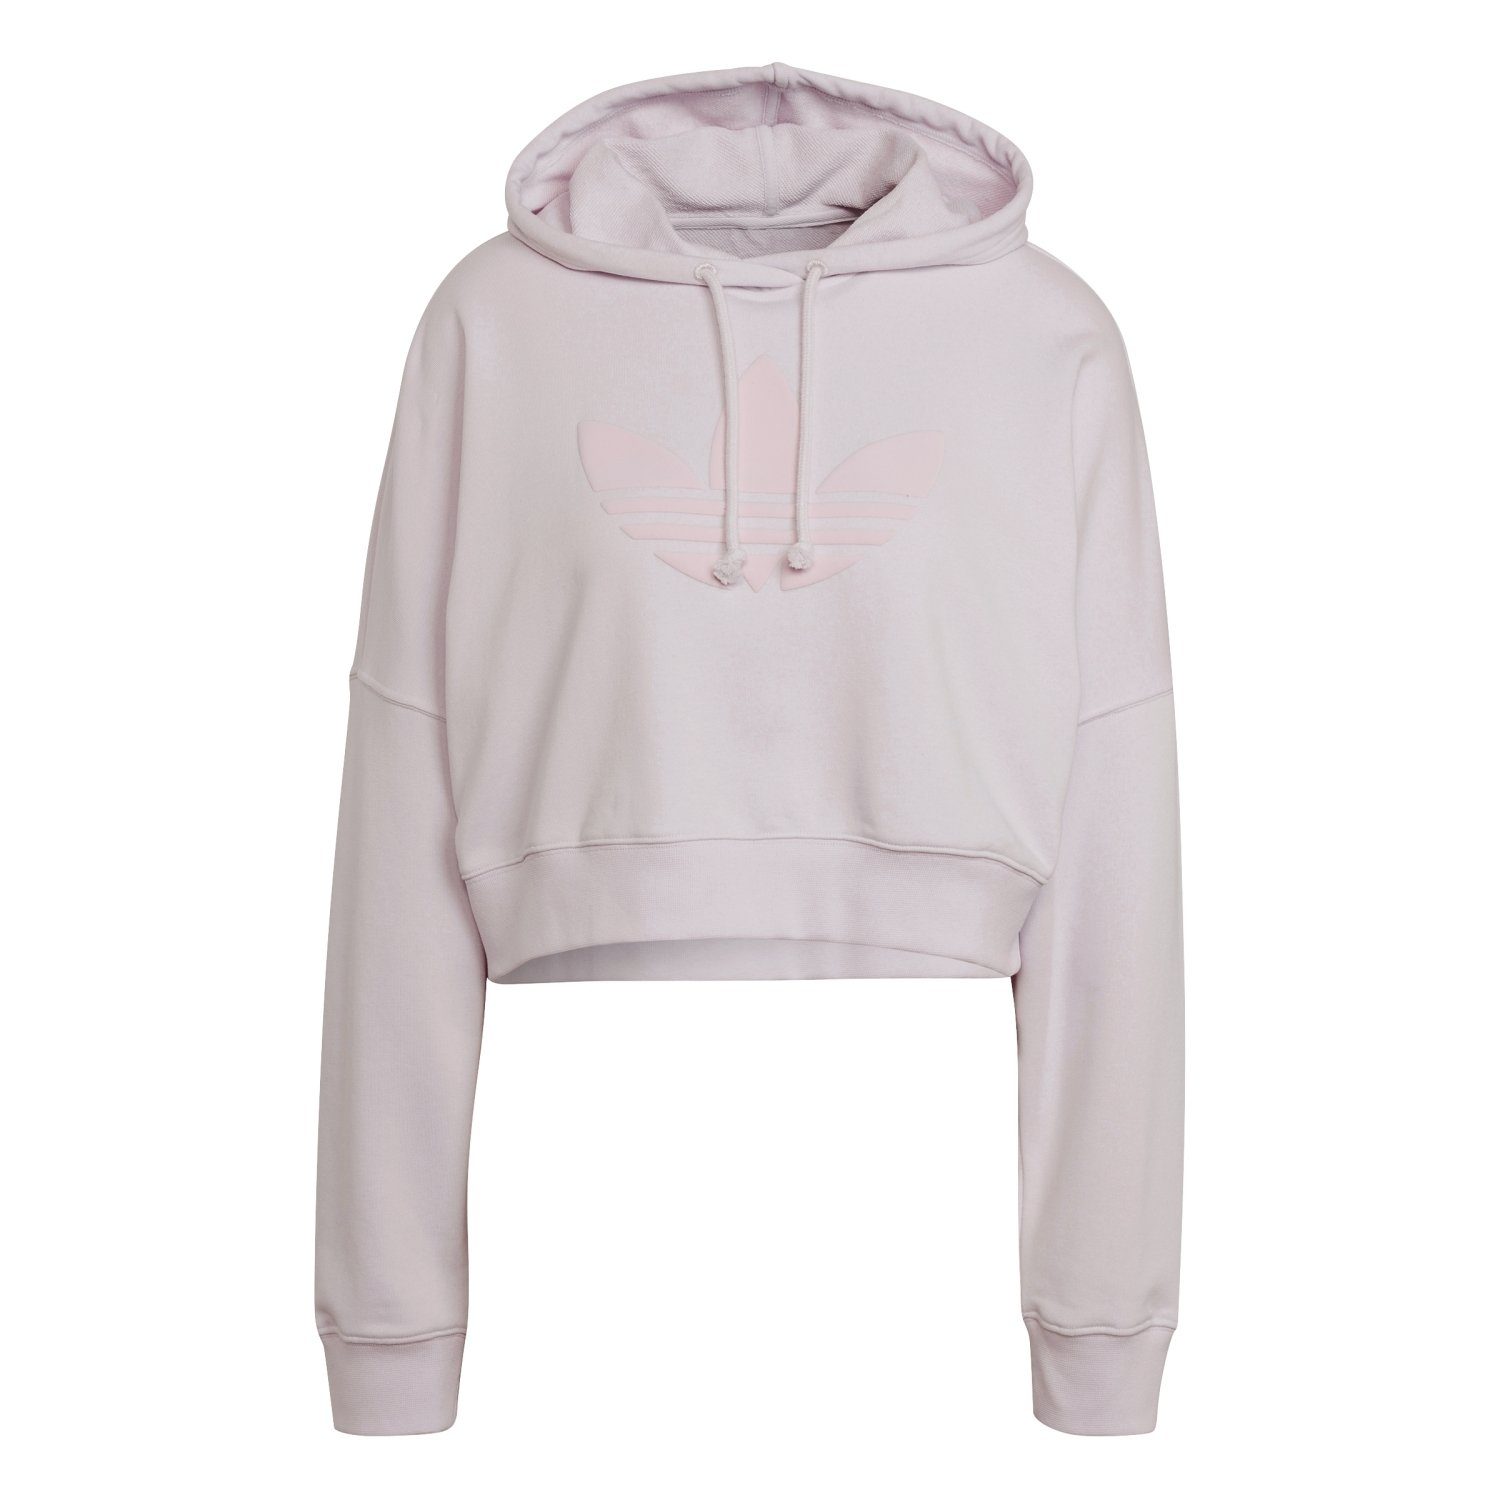 Hoodie adidas Originals Originals Hoodie adidas Cropped